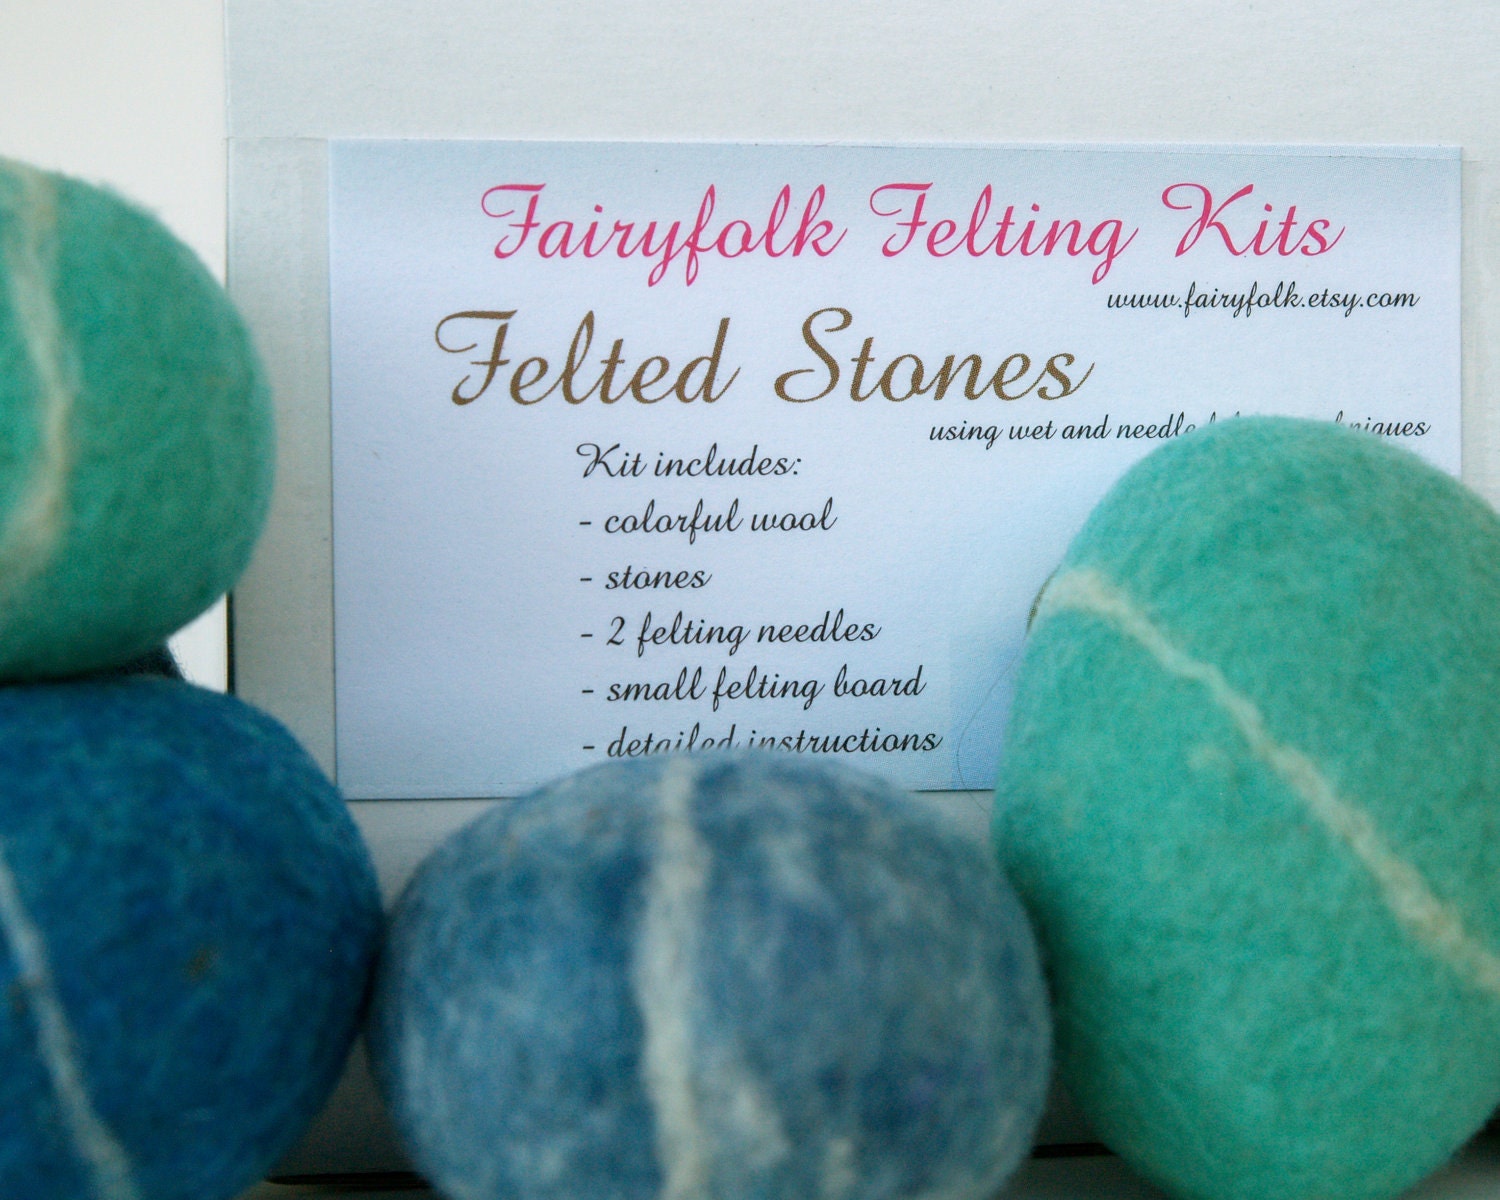 Felted Pebble Kit, Wool Felting Rocks Stone DIY Tutorial learn to New Hobby Crafting Craft Make your own Handmade Wet Beach Turquoise Blue